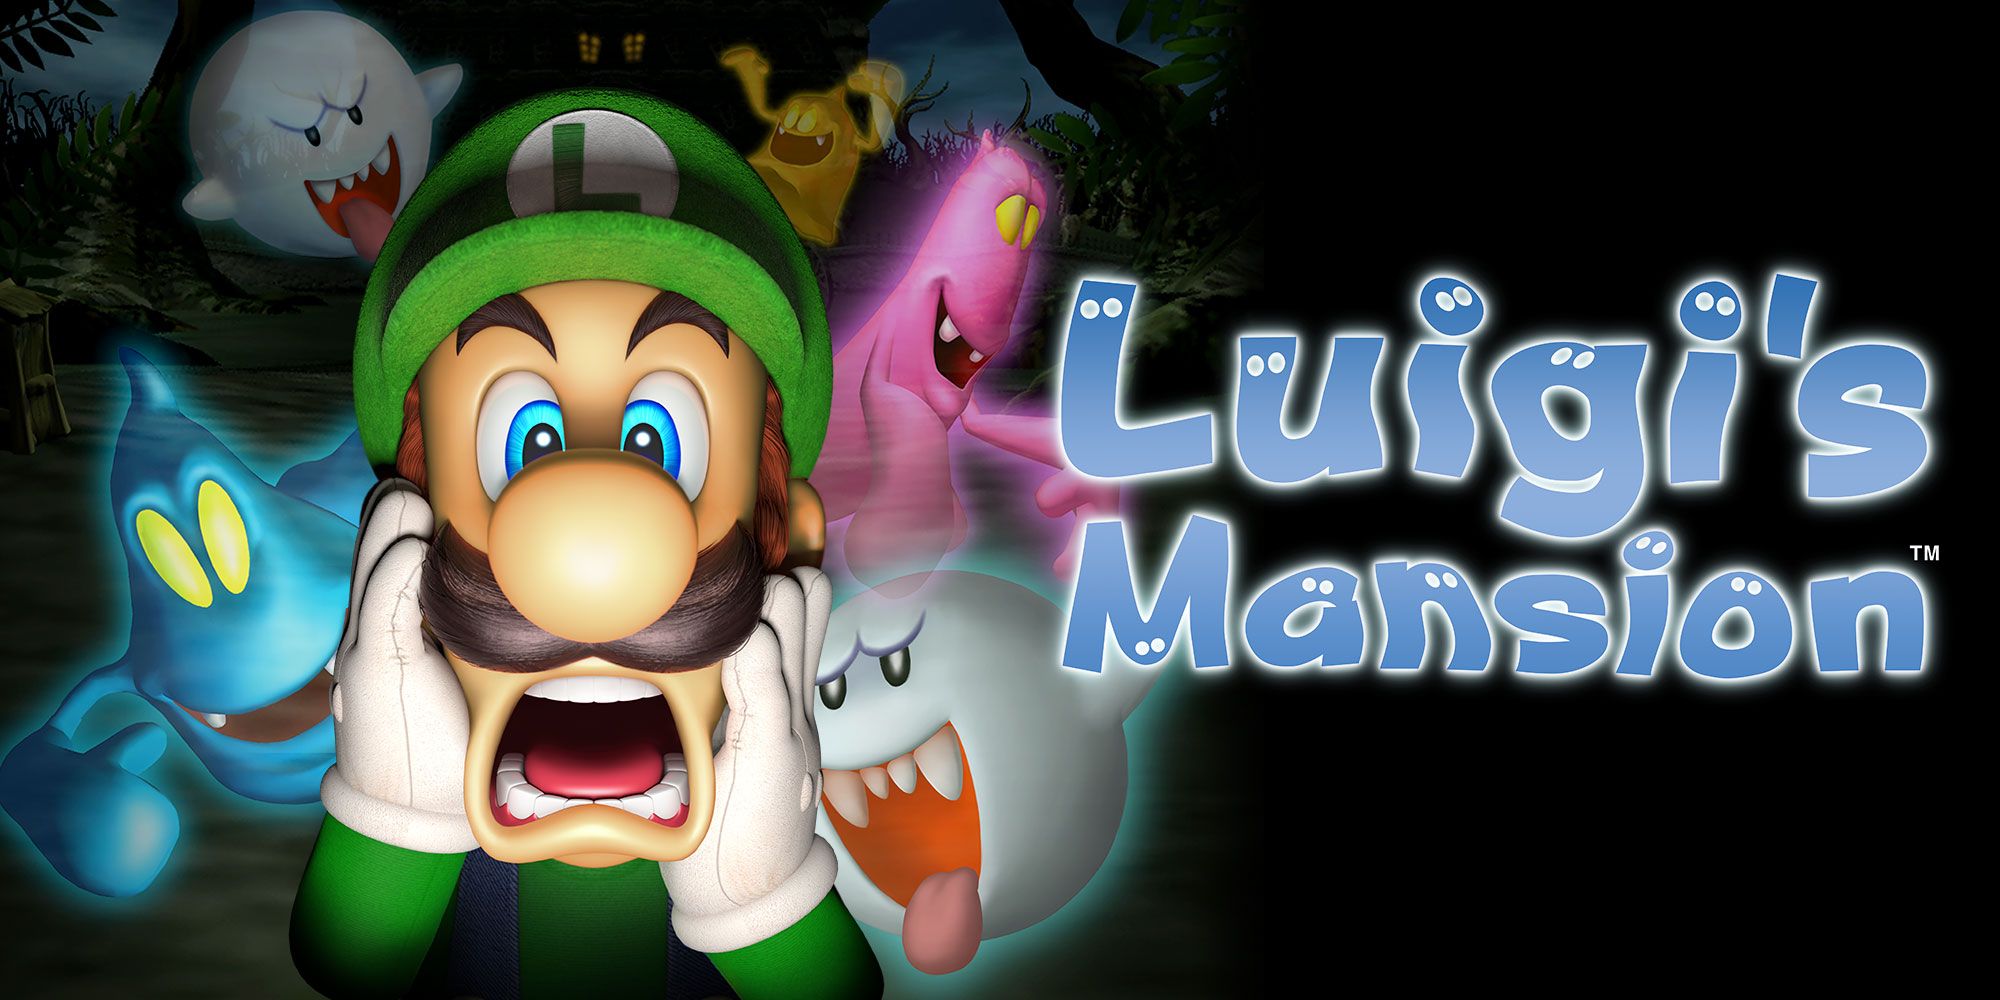 Luigi's Mansion For GameCube - Luigi Surrounded By Ghosts 